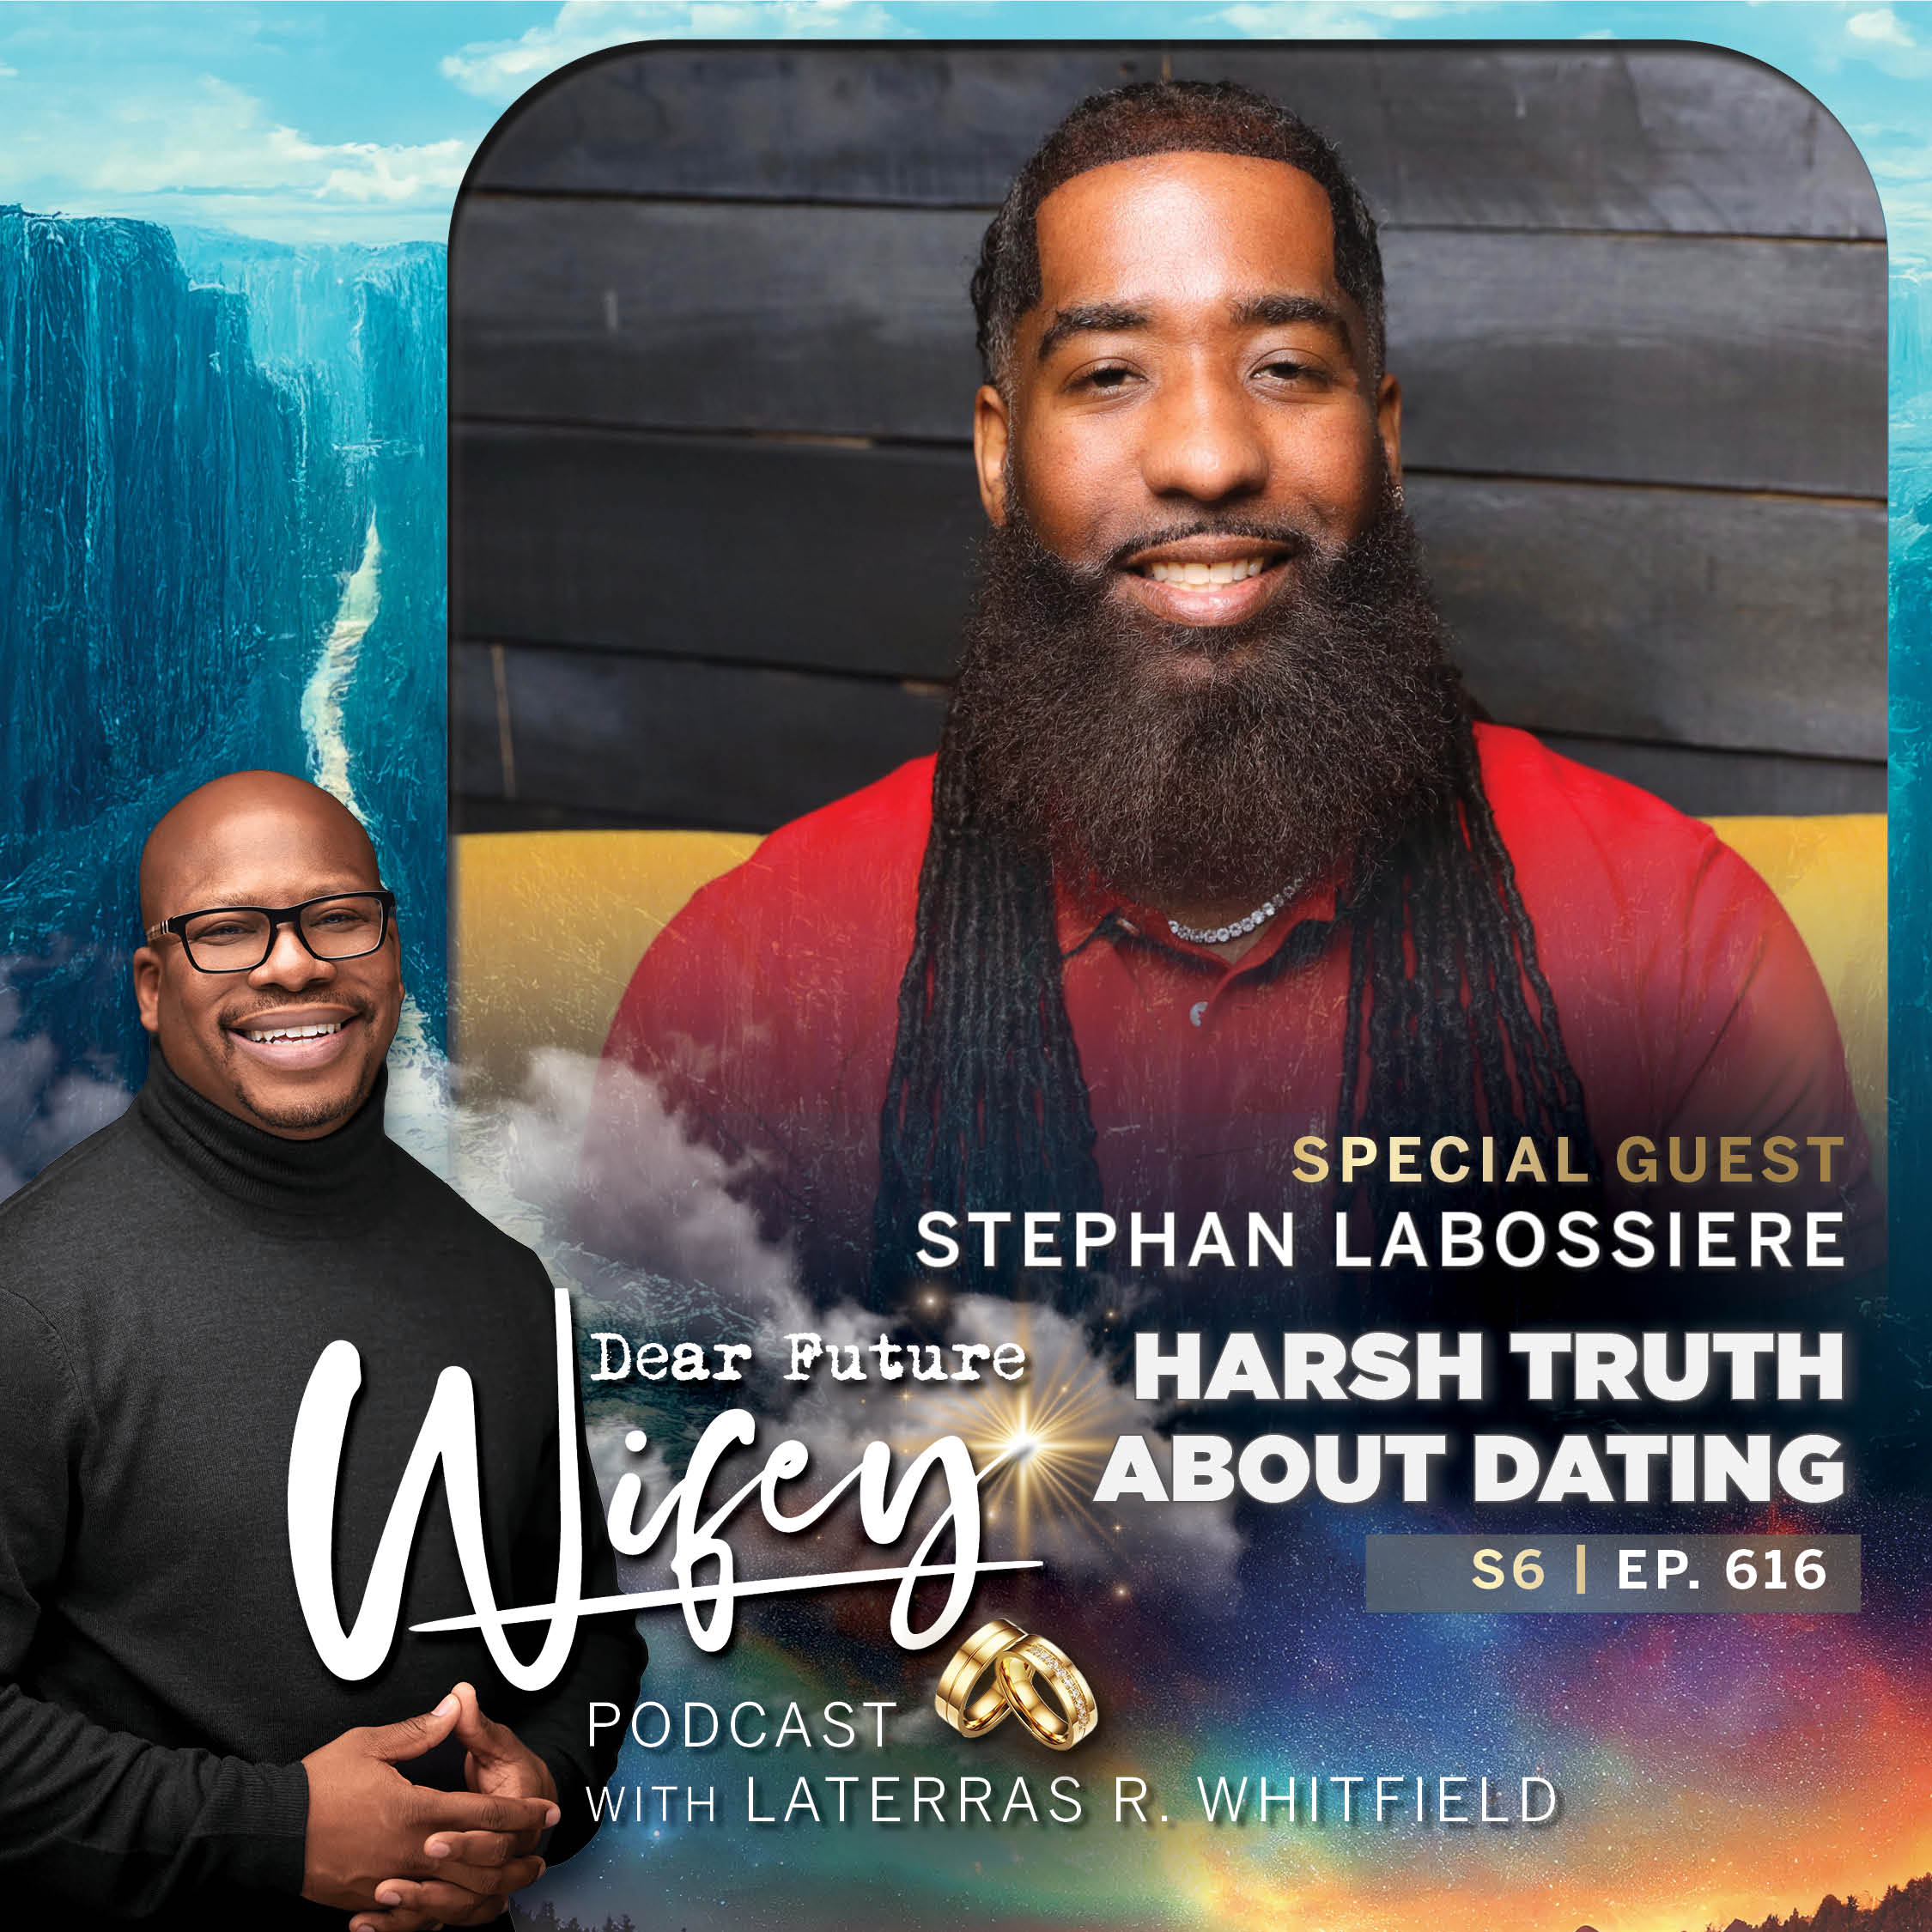 The Harsh Truth About Dating (Guest: Stephan Labossiere)